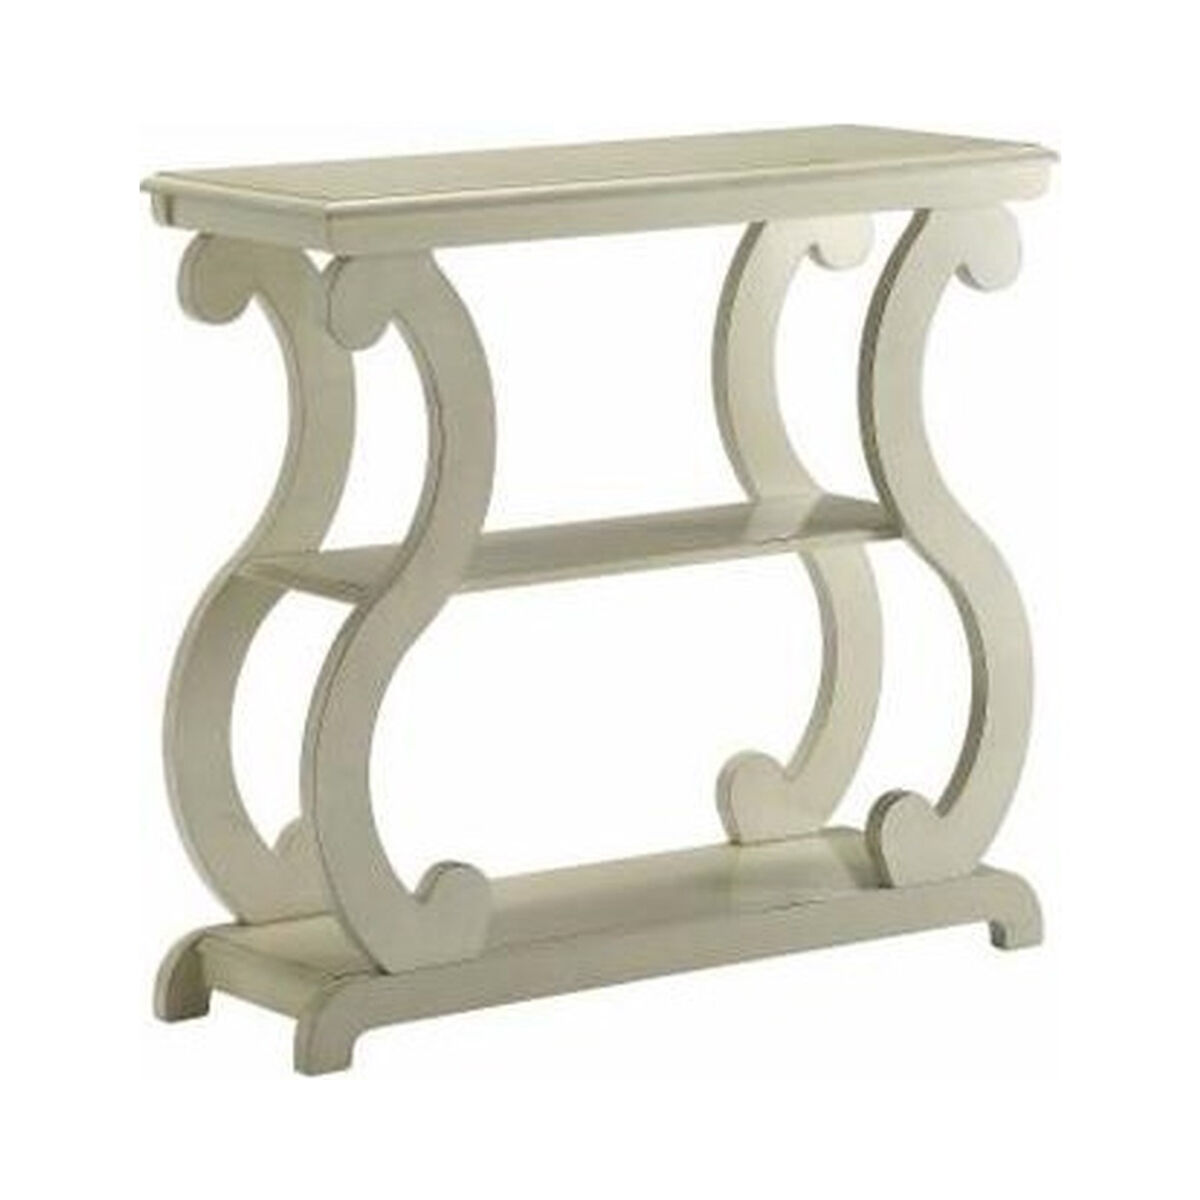 Contemporary Wooden Console Table with 2 Open Bottom Shelves, White